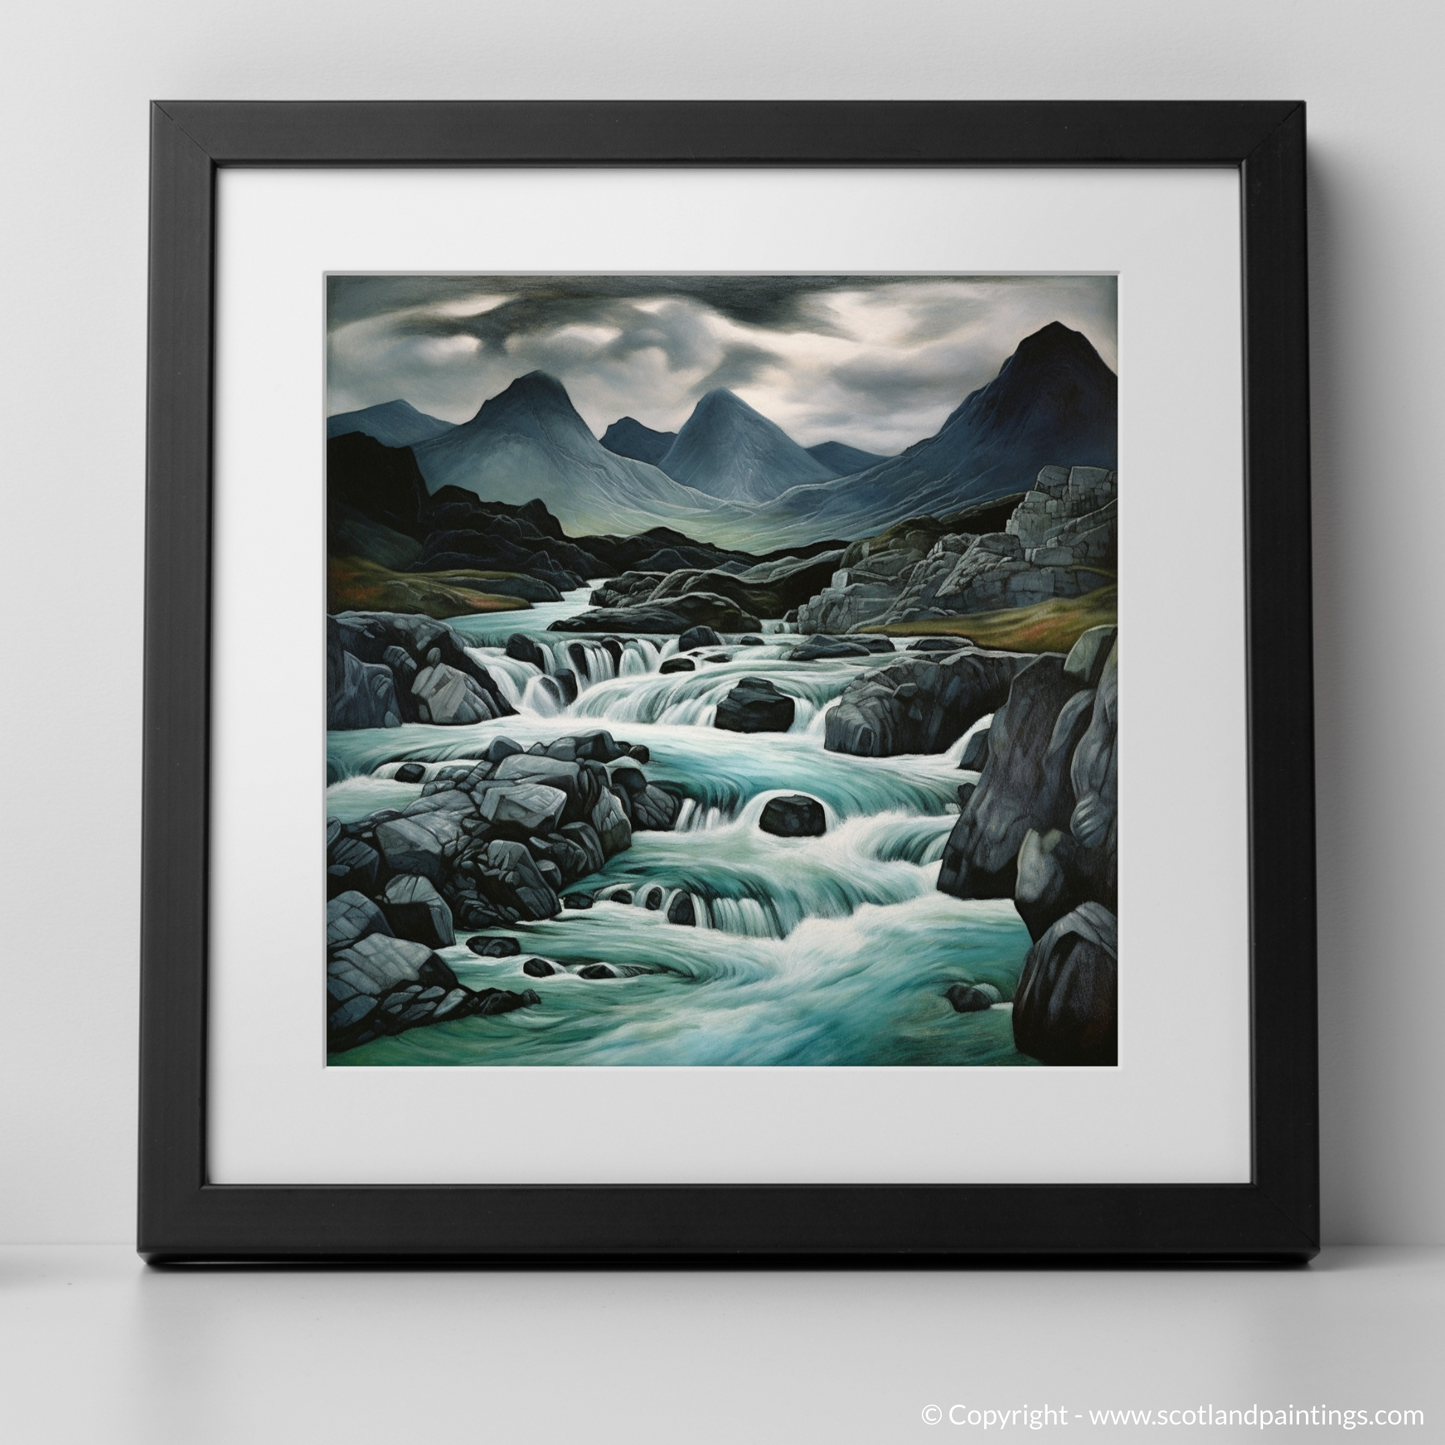 Storm over Fairy Pools: A Surrealist Tribute to Skye's Dramatic Beauty